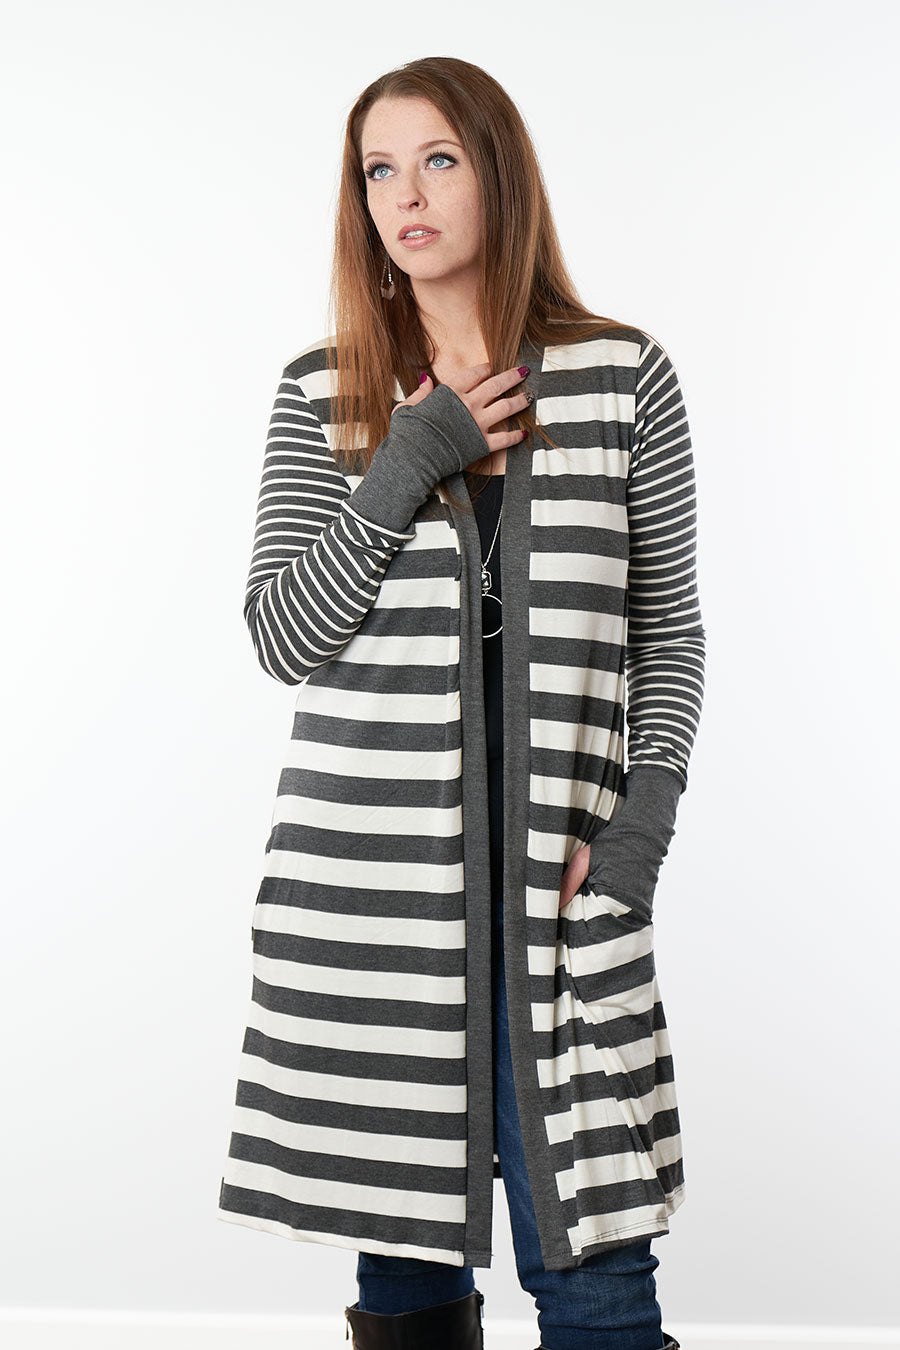 Don't Waste A Moment Striped Cardigan Front